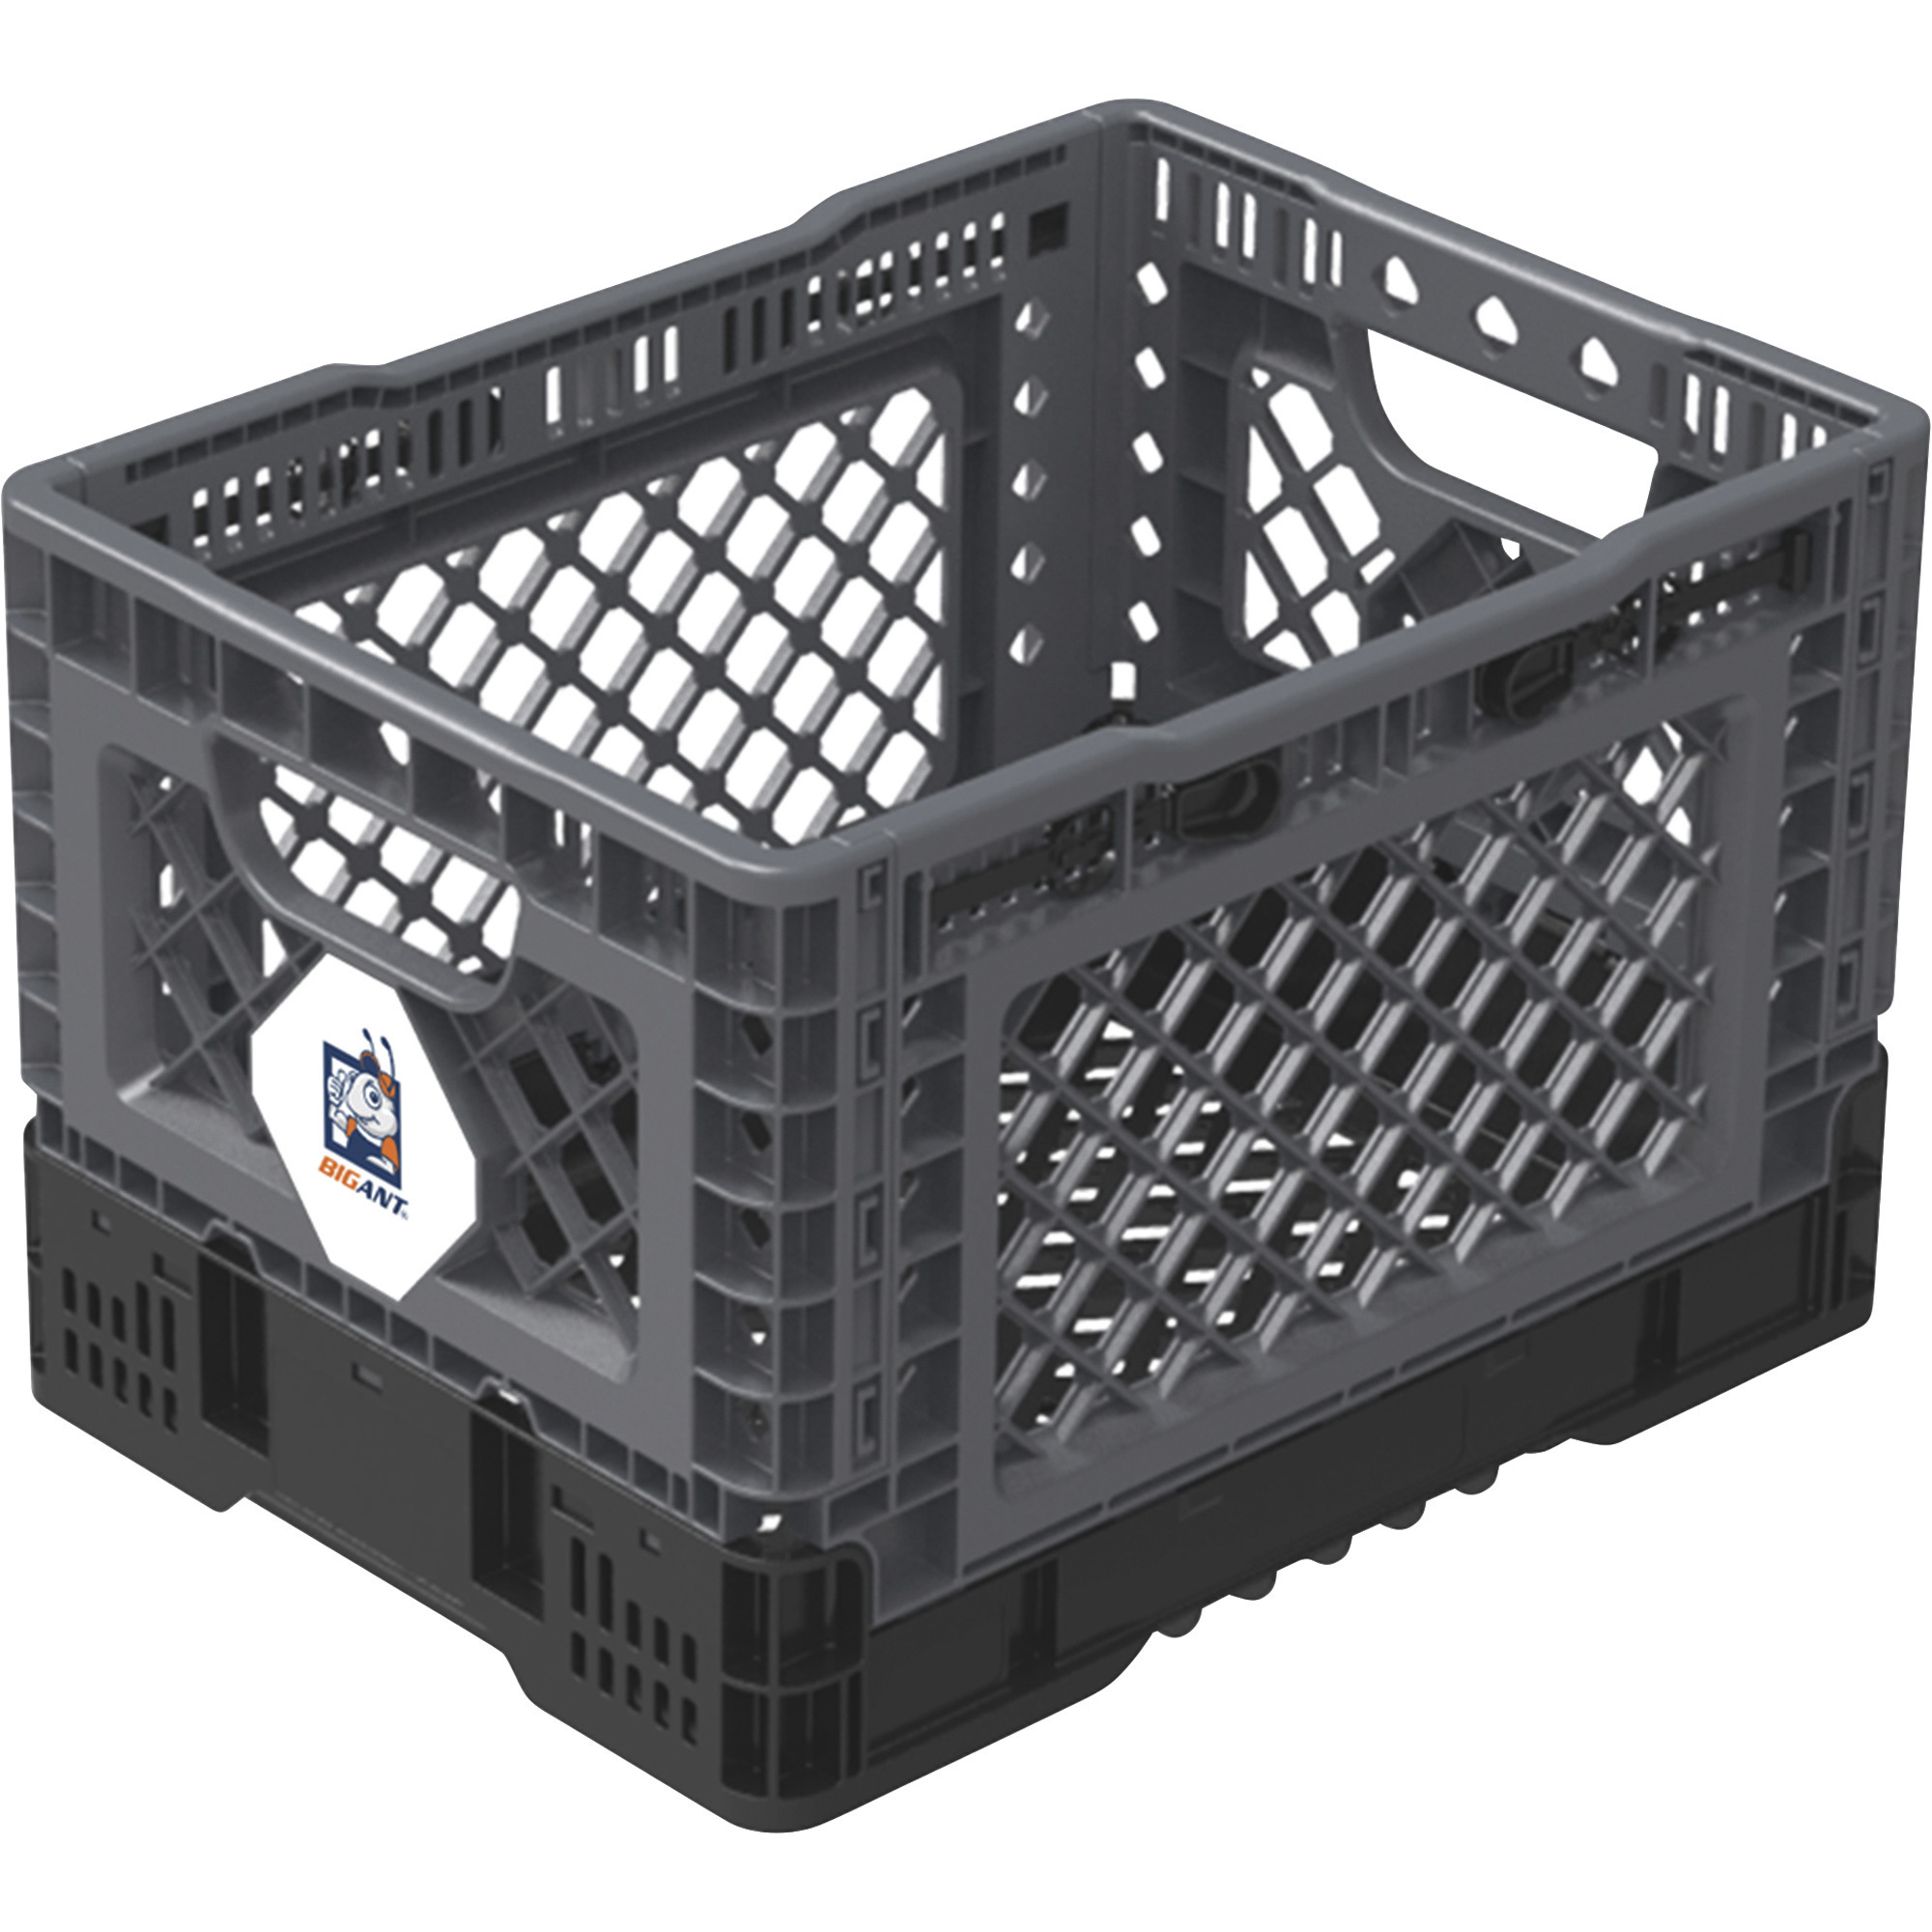 BIG ANT Collapsible Smart Crate â 6-Gallon, 132-Lb. Capacity, 11 5/8Inch L x 15 9/16Inch W x 10 1/4Inch H, Model IP403026